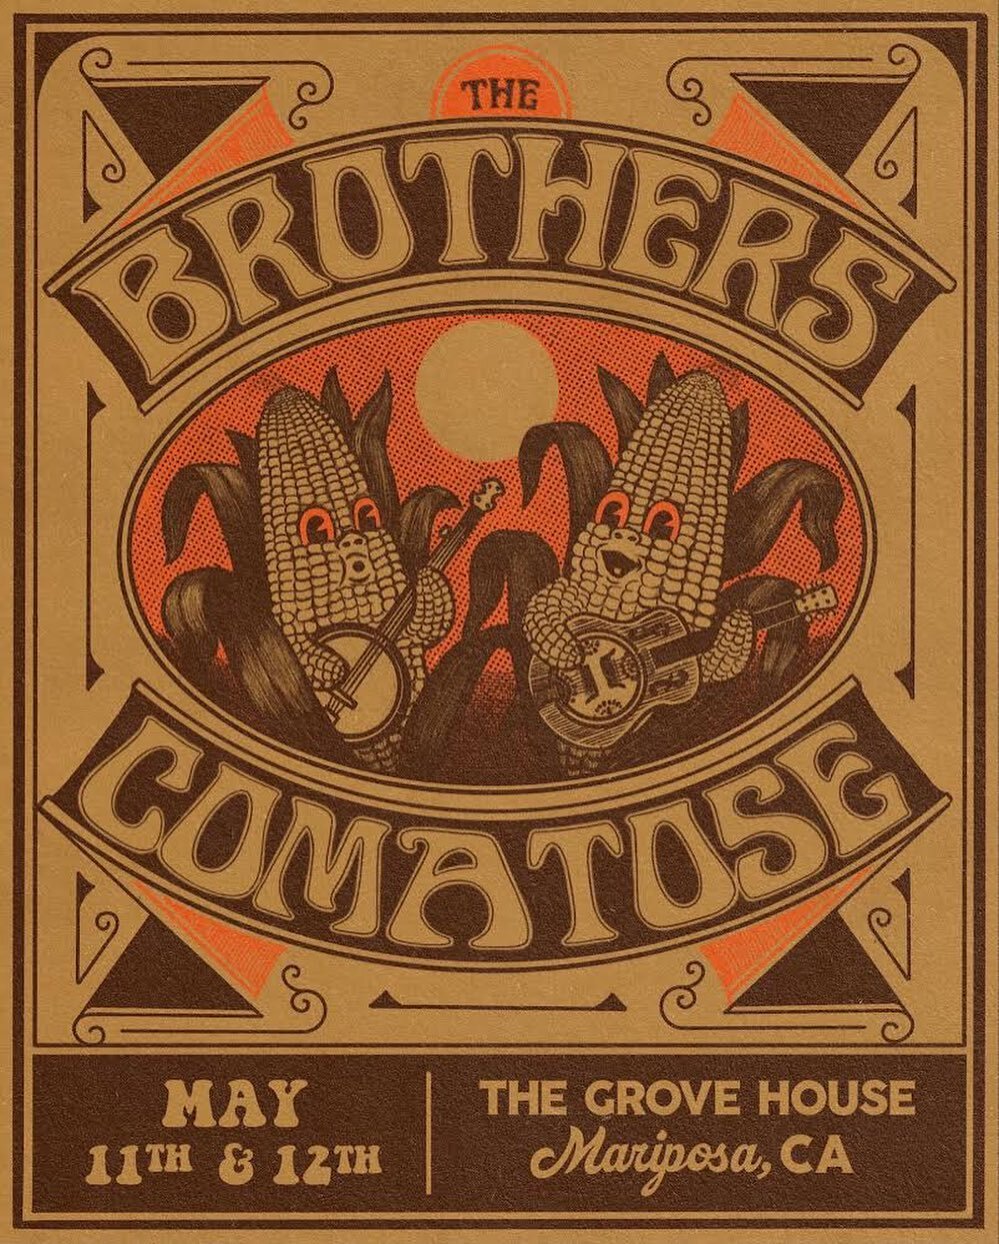 @broscomatose shows are officially sold out! Thanks to everyone who bought tickets. See you all Thursday and Friday!